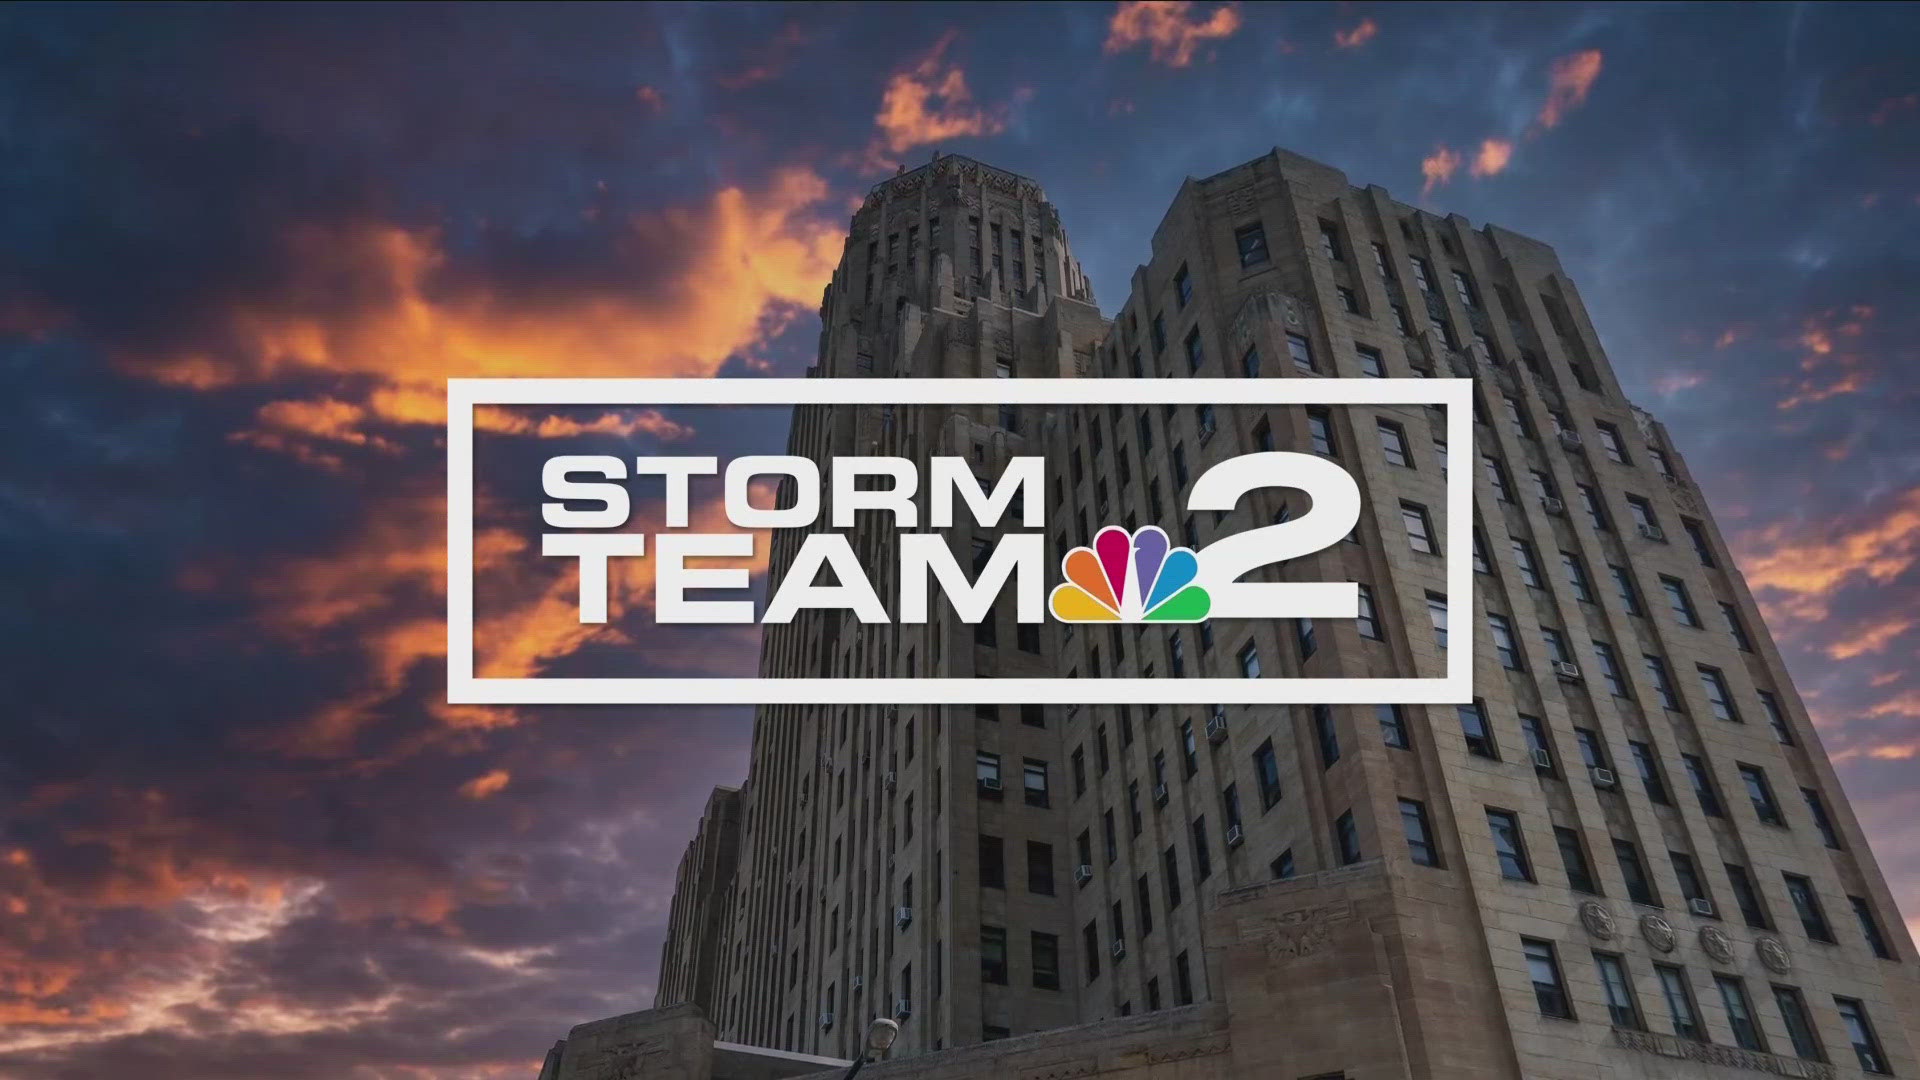 Storm Team 2 night forecast with Paul Hare for Saturday, July 6.